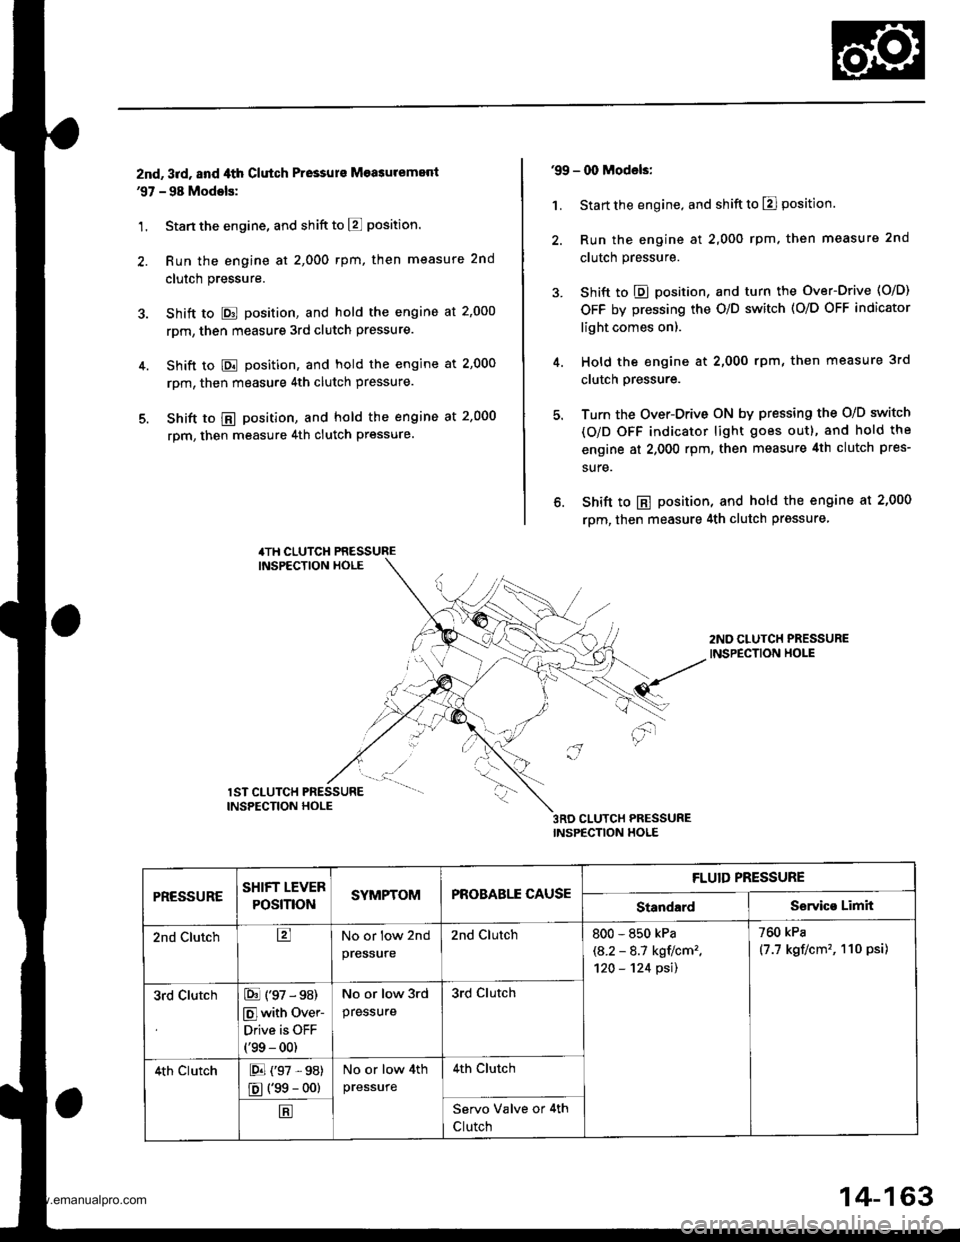 HONDA CR-V 1998 RD1-RD3 / 1.G Service Manual 
znd, 3rd, and ,lth Clutch Pressurs Measuremenl97 - 98 Modols:
1. Stan the engine, and shift to E position.
2. Run the engine at 2,000 rpm, then measure 2nd
clutch pressure.
3. Shift to E position, a